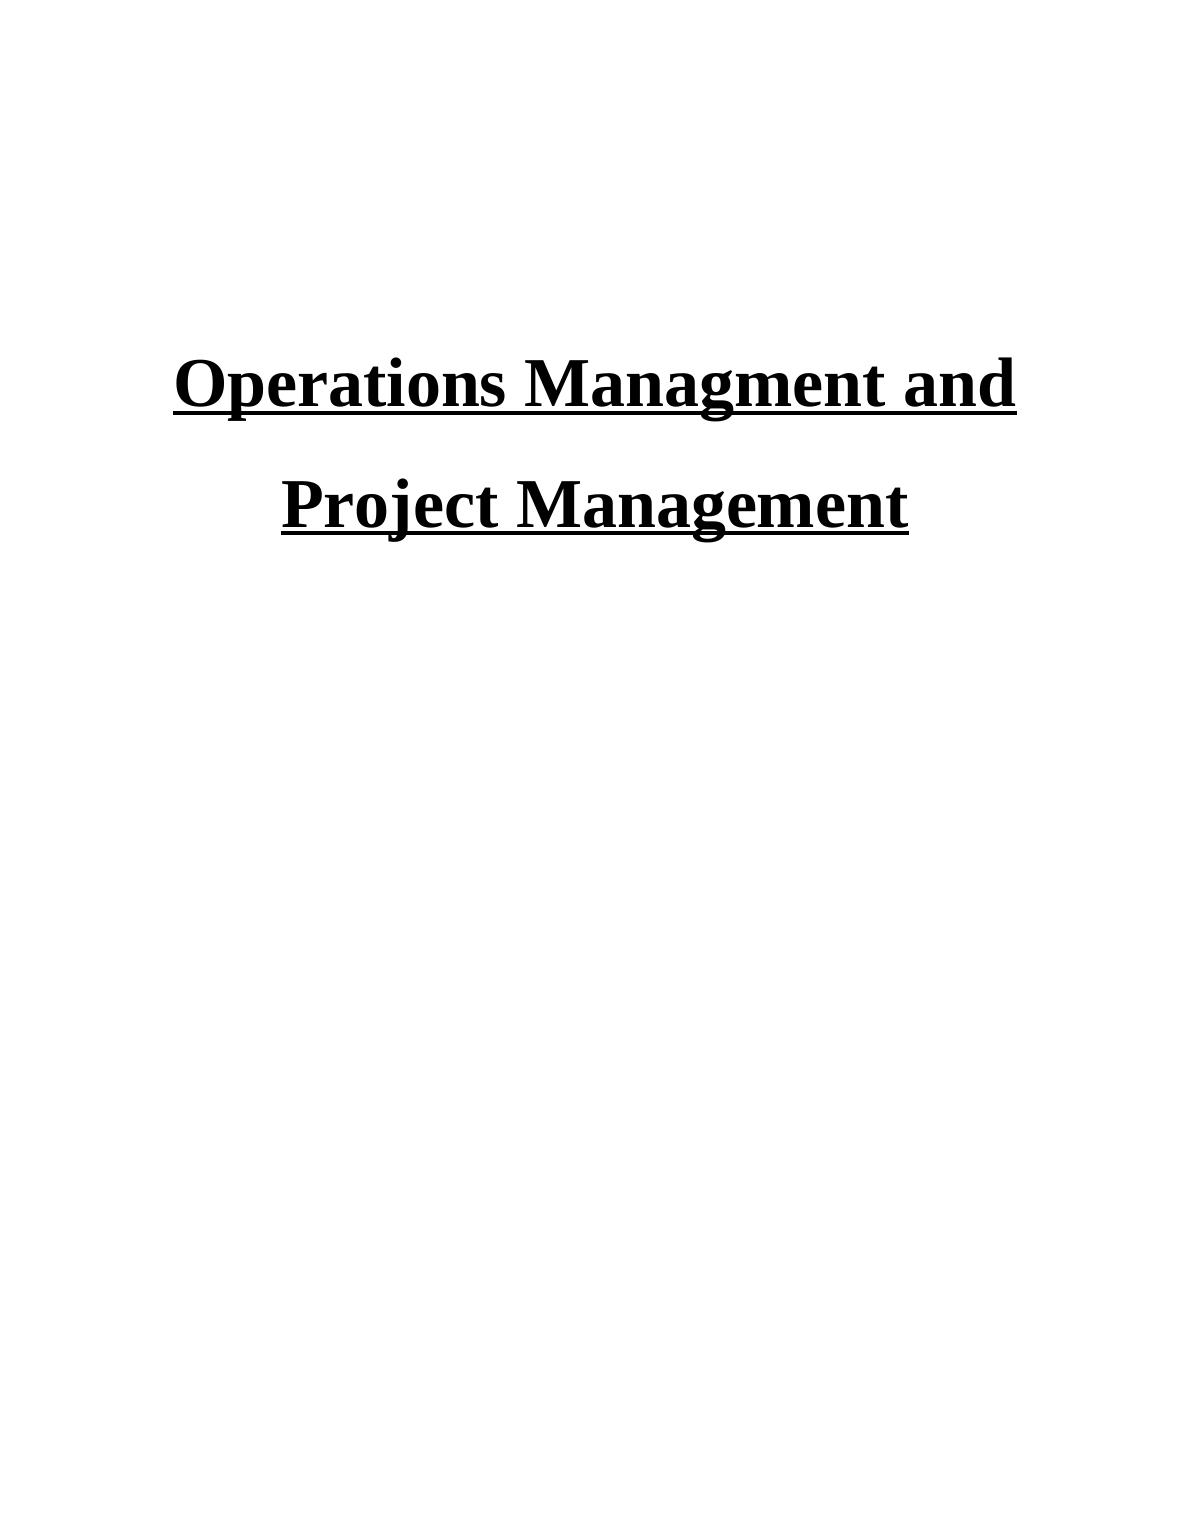 Operations Management and Project Management_1